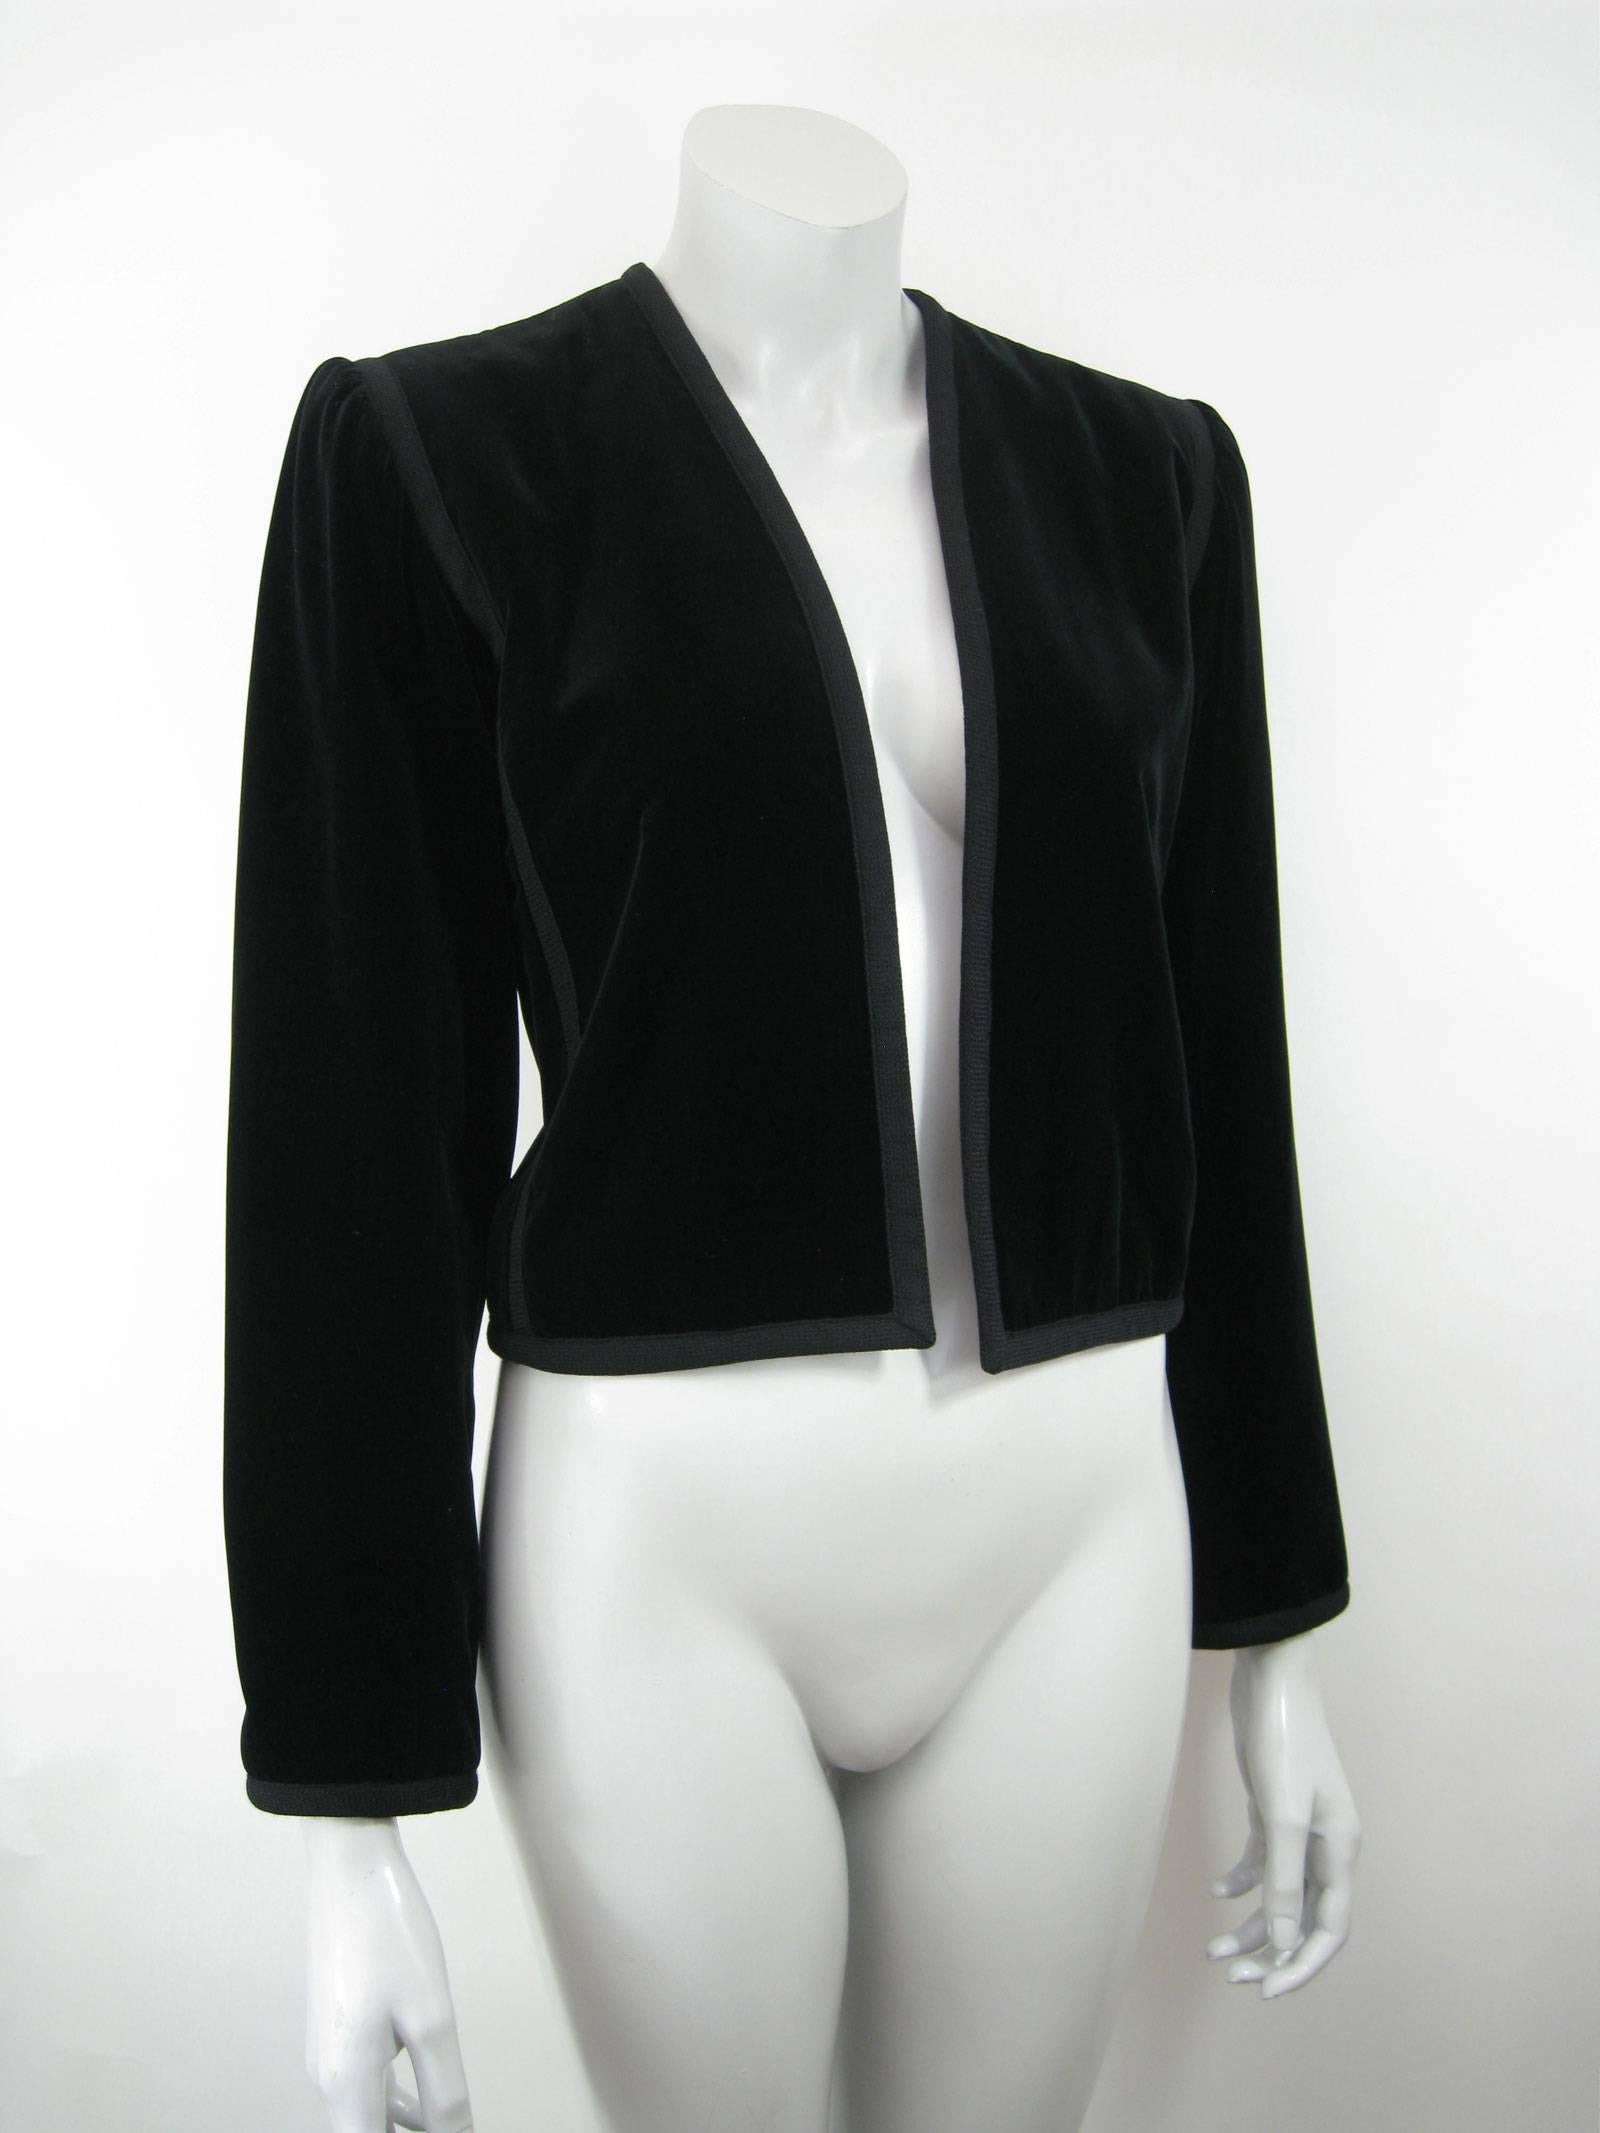 YSL Rive Gauche black velvet cropped jacket.
Bolero style.
No closures.
Slightly puffed/pleated shoulder.
Textured ribbon trim detailing.
Lined.
Tagged size 36.